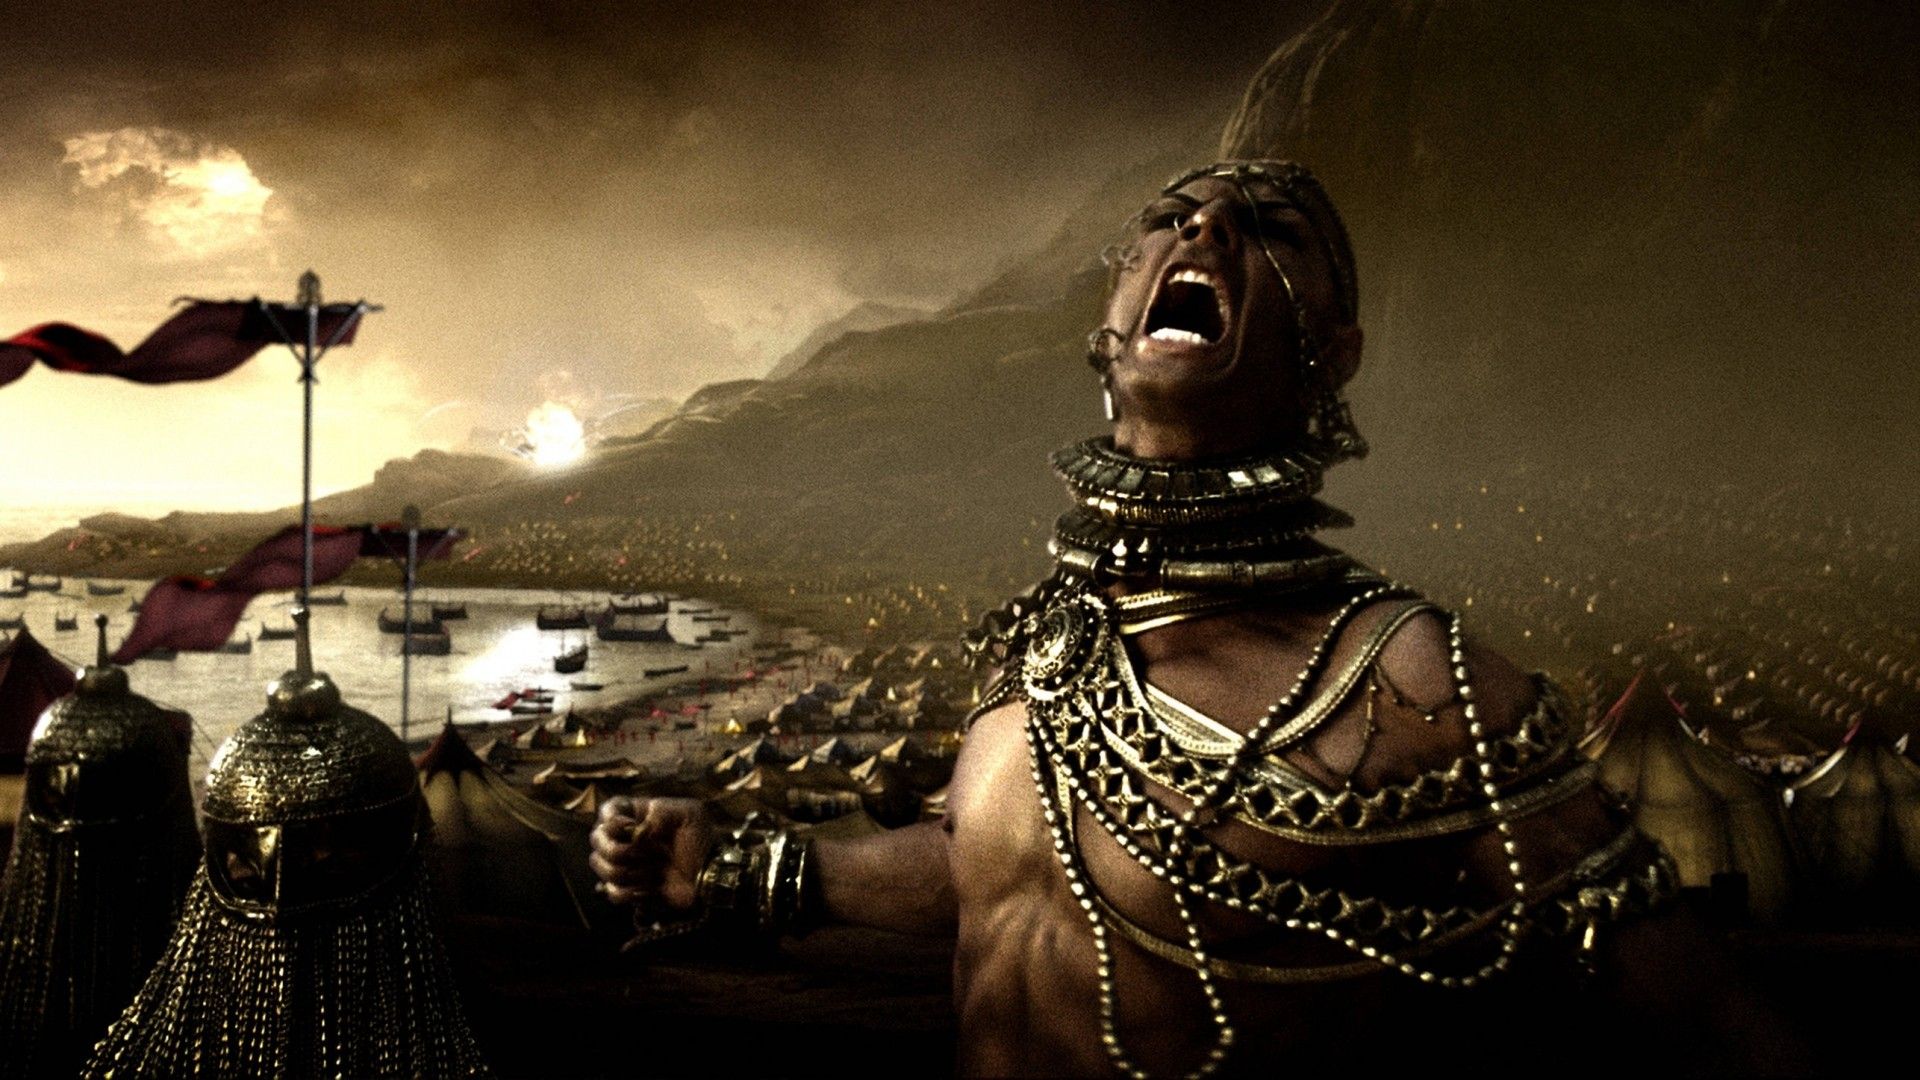 Full HD Wallpaper 300 spartans xerxes rage army thermopylae. movie, Movie wallpaper, Streaming movies